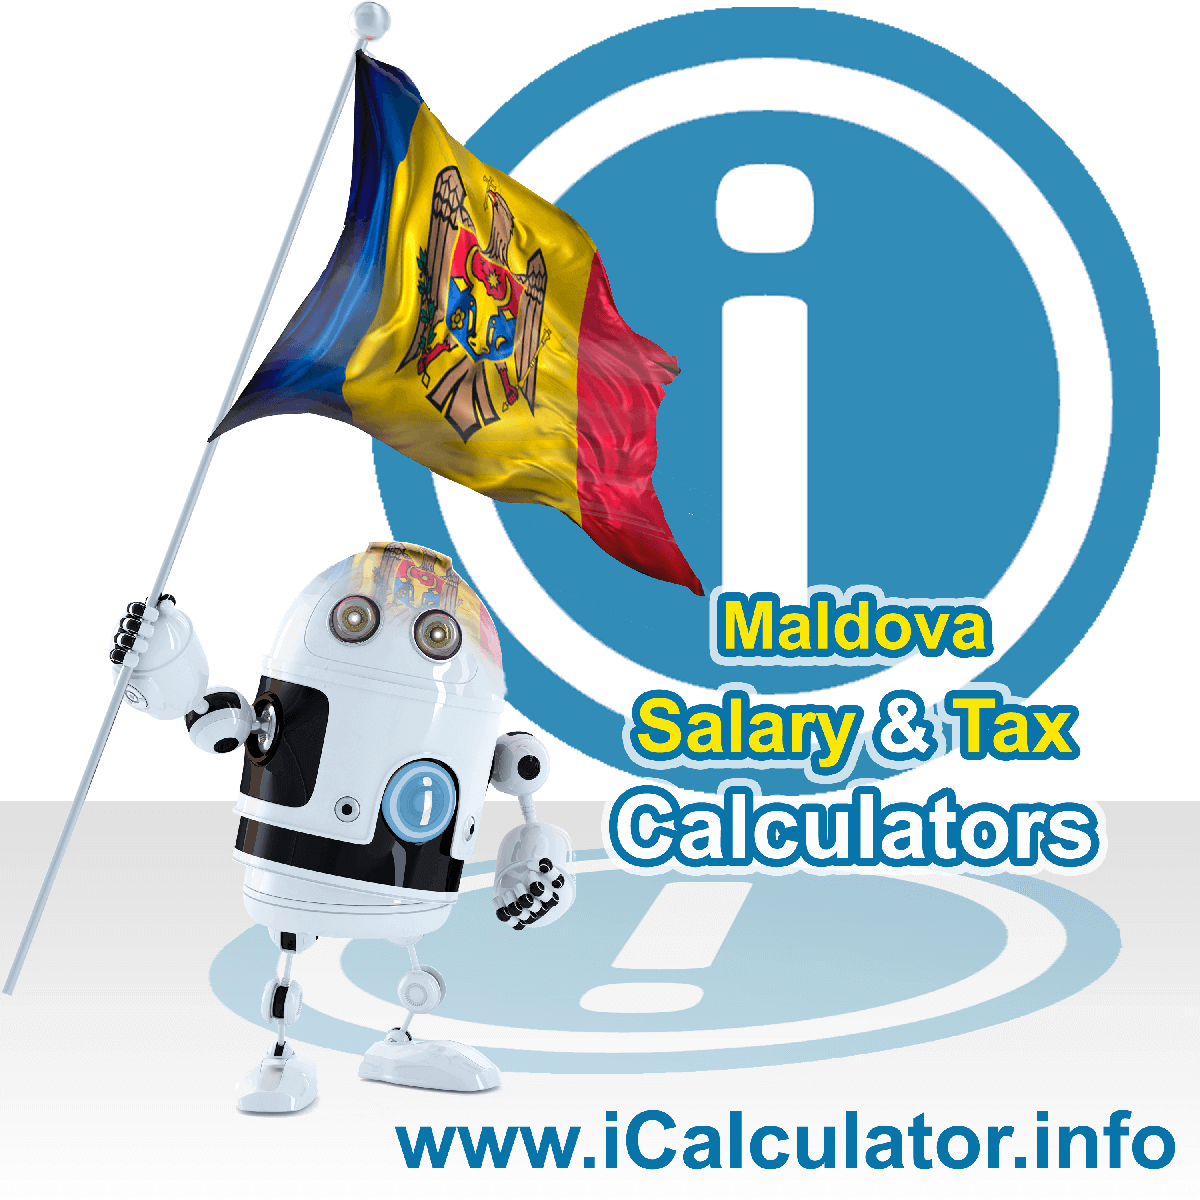 Moldova Tax Calculator. This image shows the Moldova flag and information relating to the tax formula for the Moldova Salary Calculator